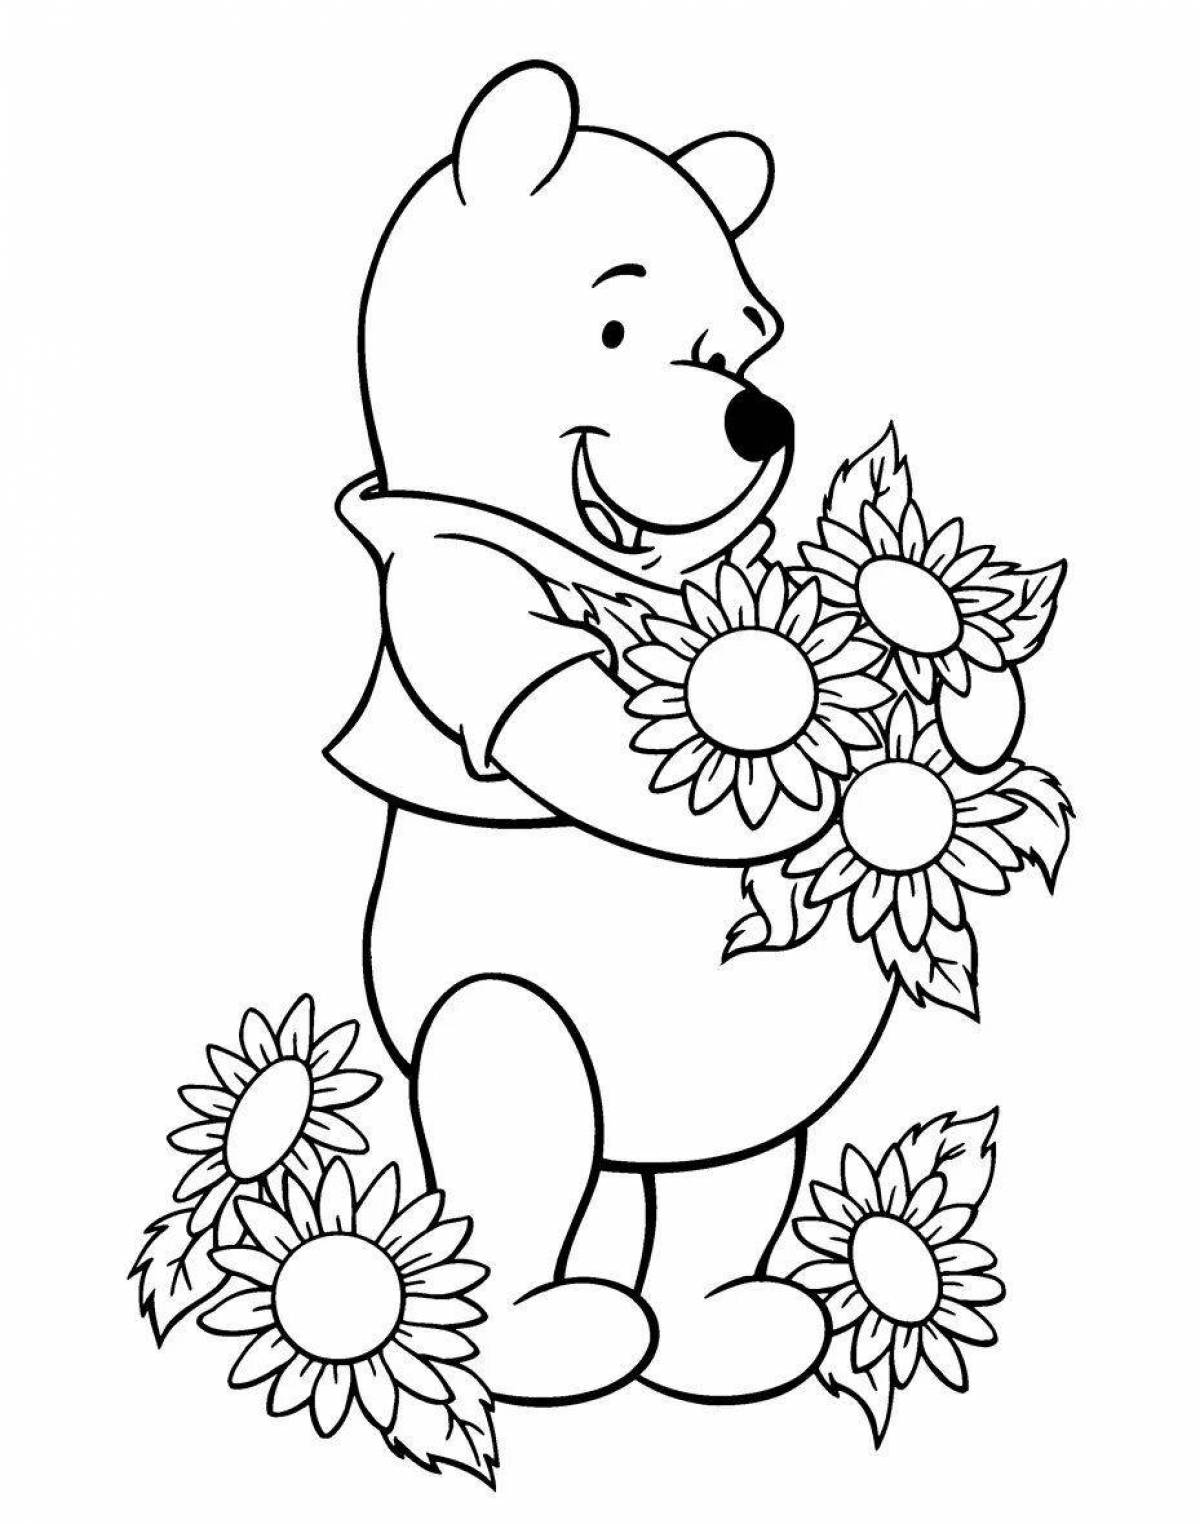 Amazing bear coloring book for kids 5-6 years old